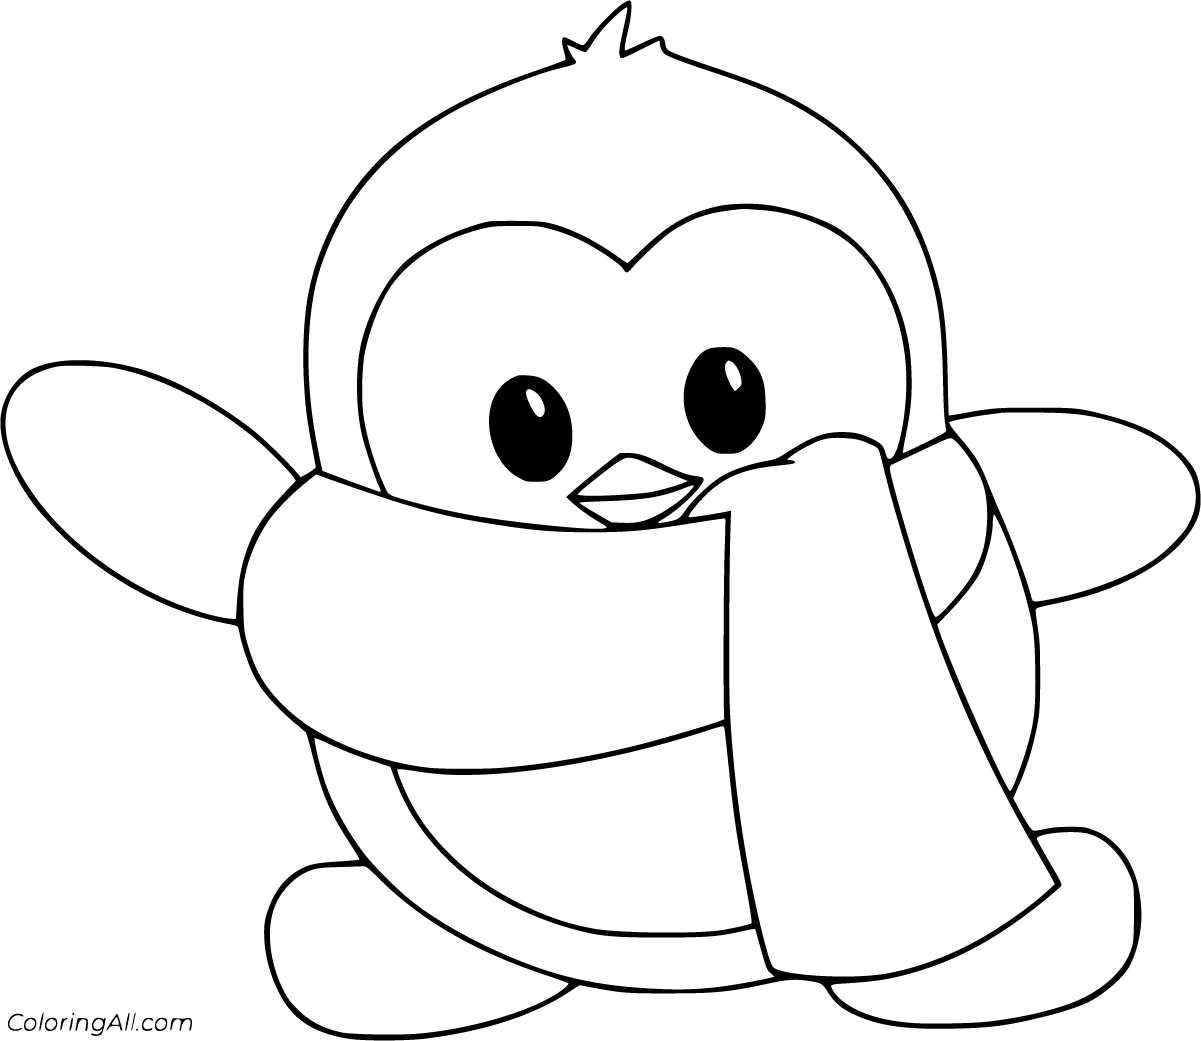 Penguin Coloring Pages   ColoringAll